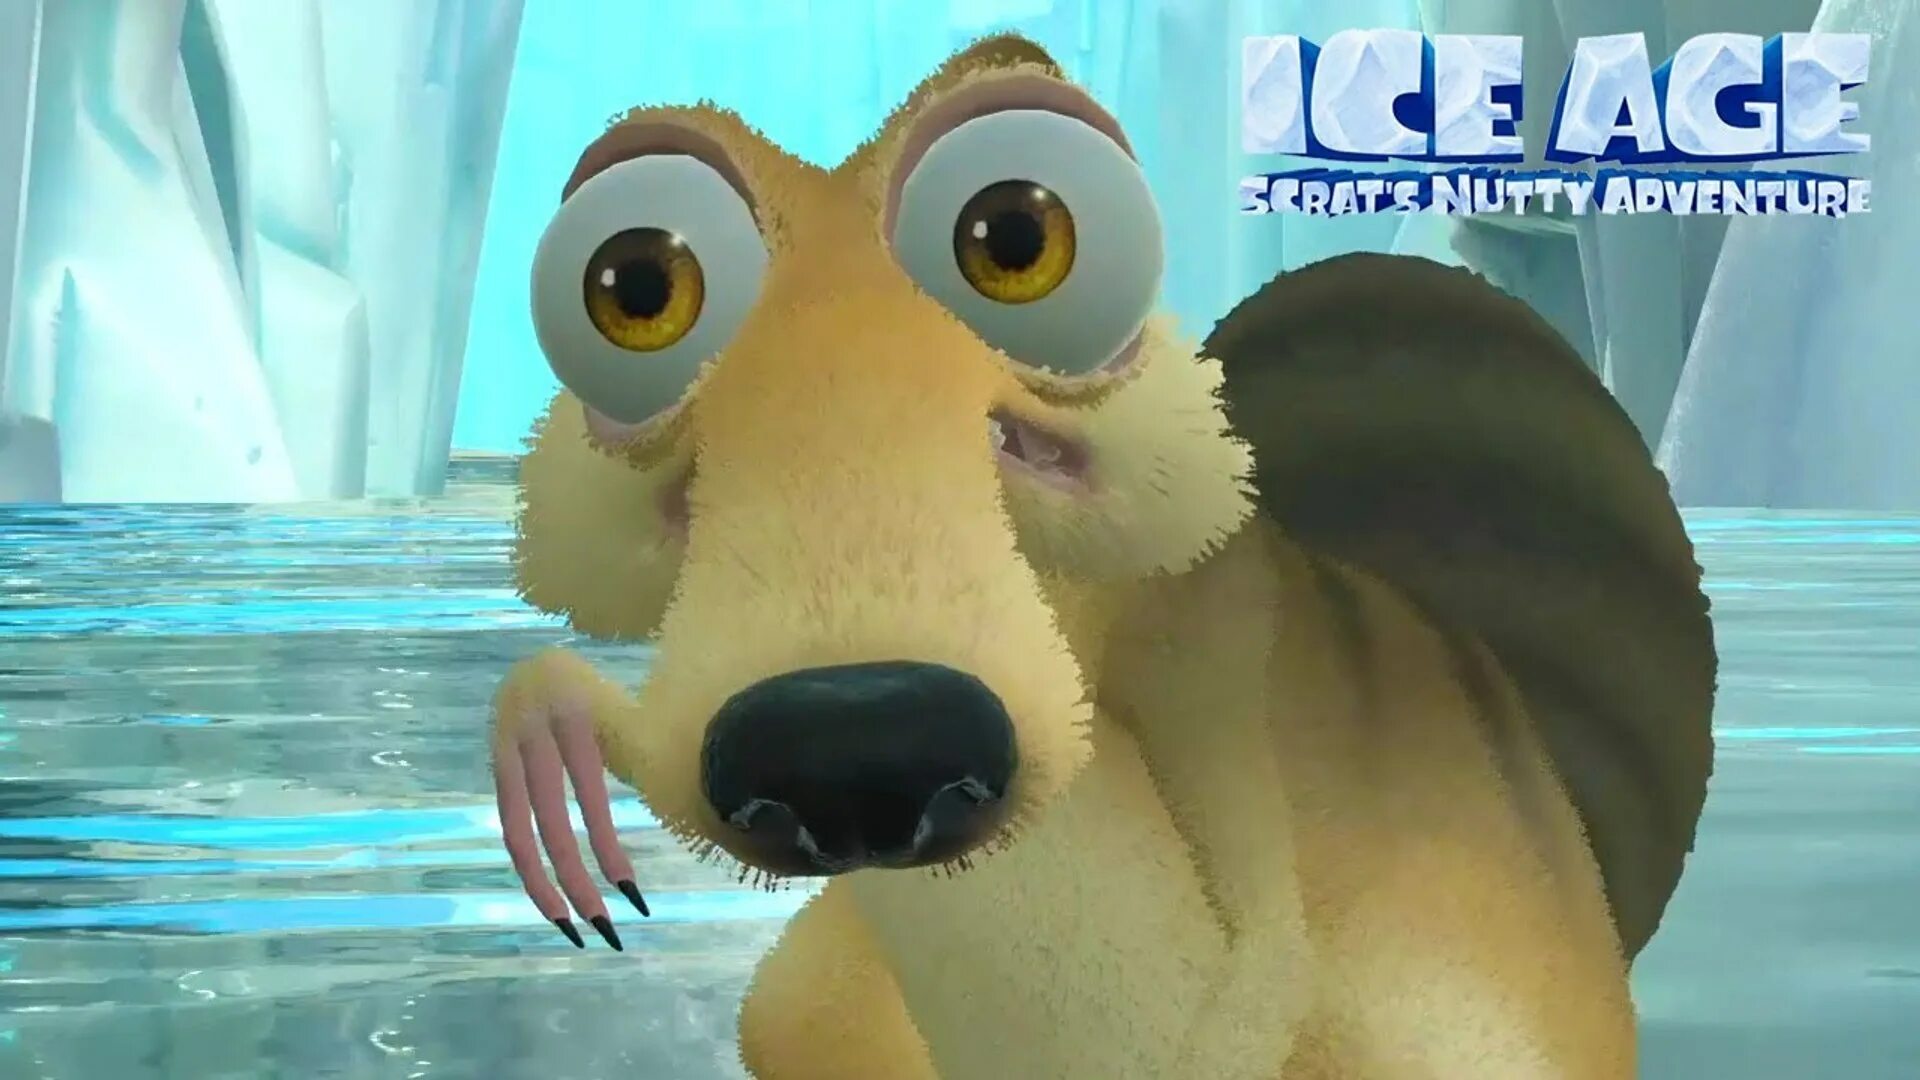 Ice age scrats nutty. Игра Ice age Scrat's Nutty Adventure. Скрат Ледниковый период 2002. Ice age: 4 ps2. Ледниковый период ps1.